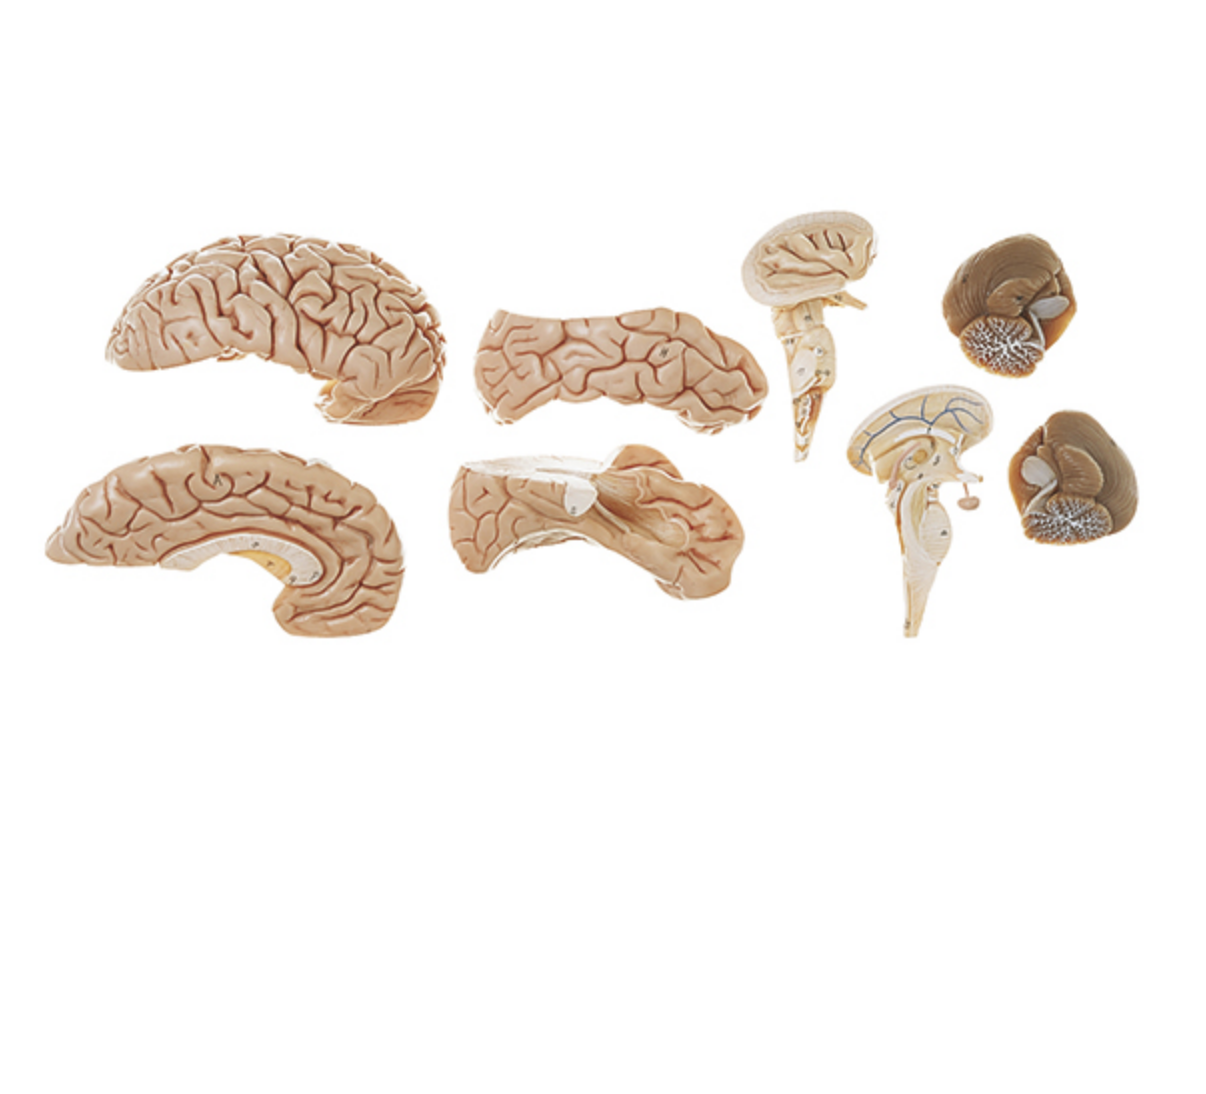 Brain model in high quality and in 8 parts